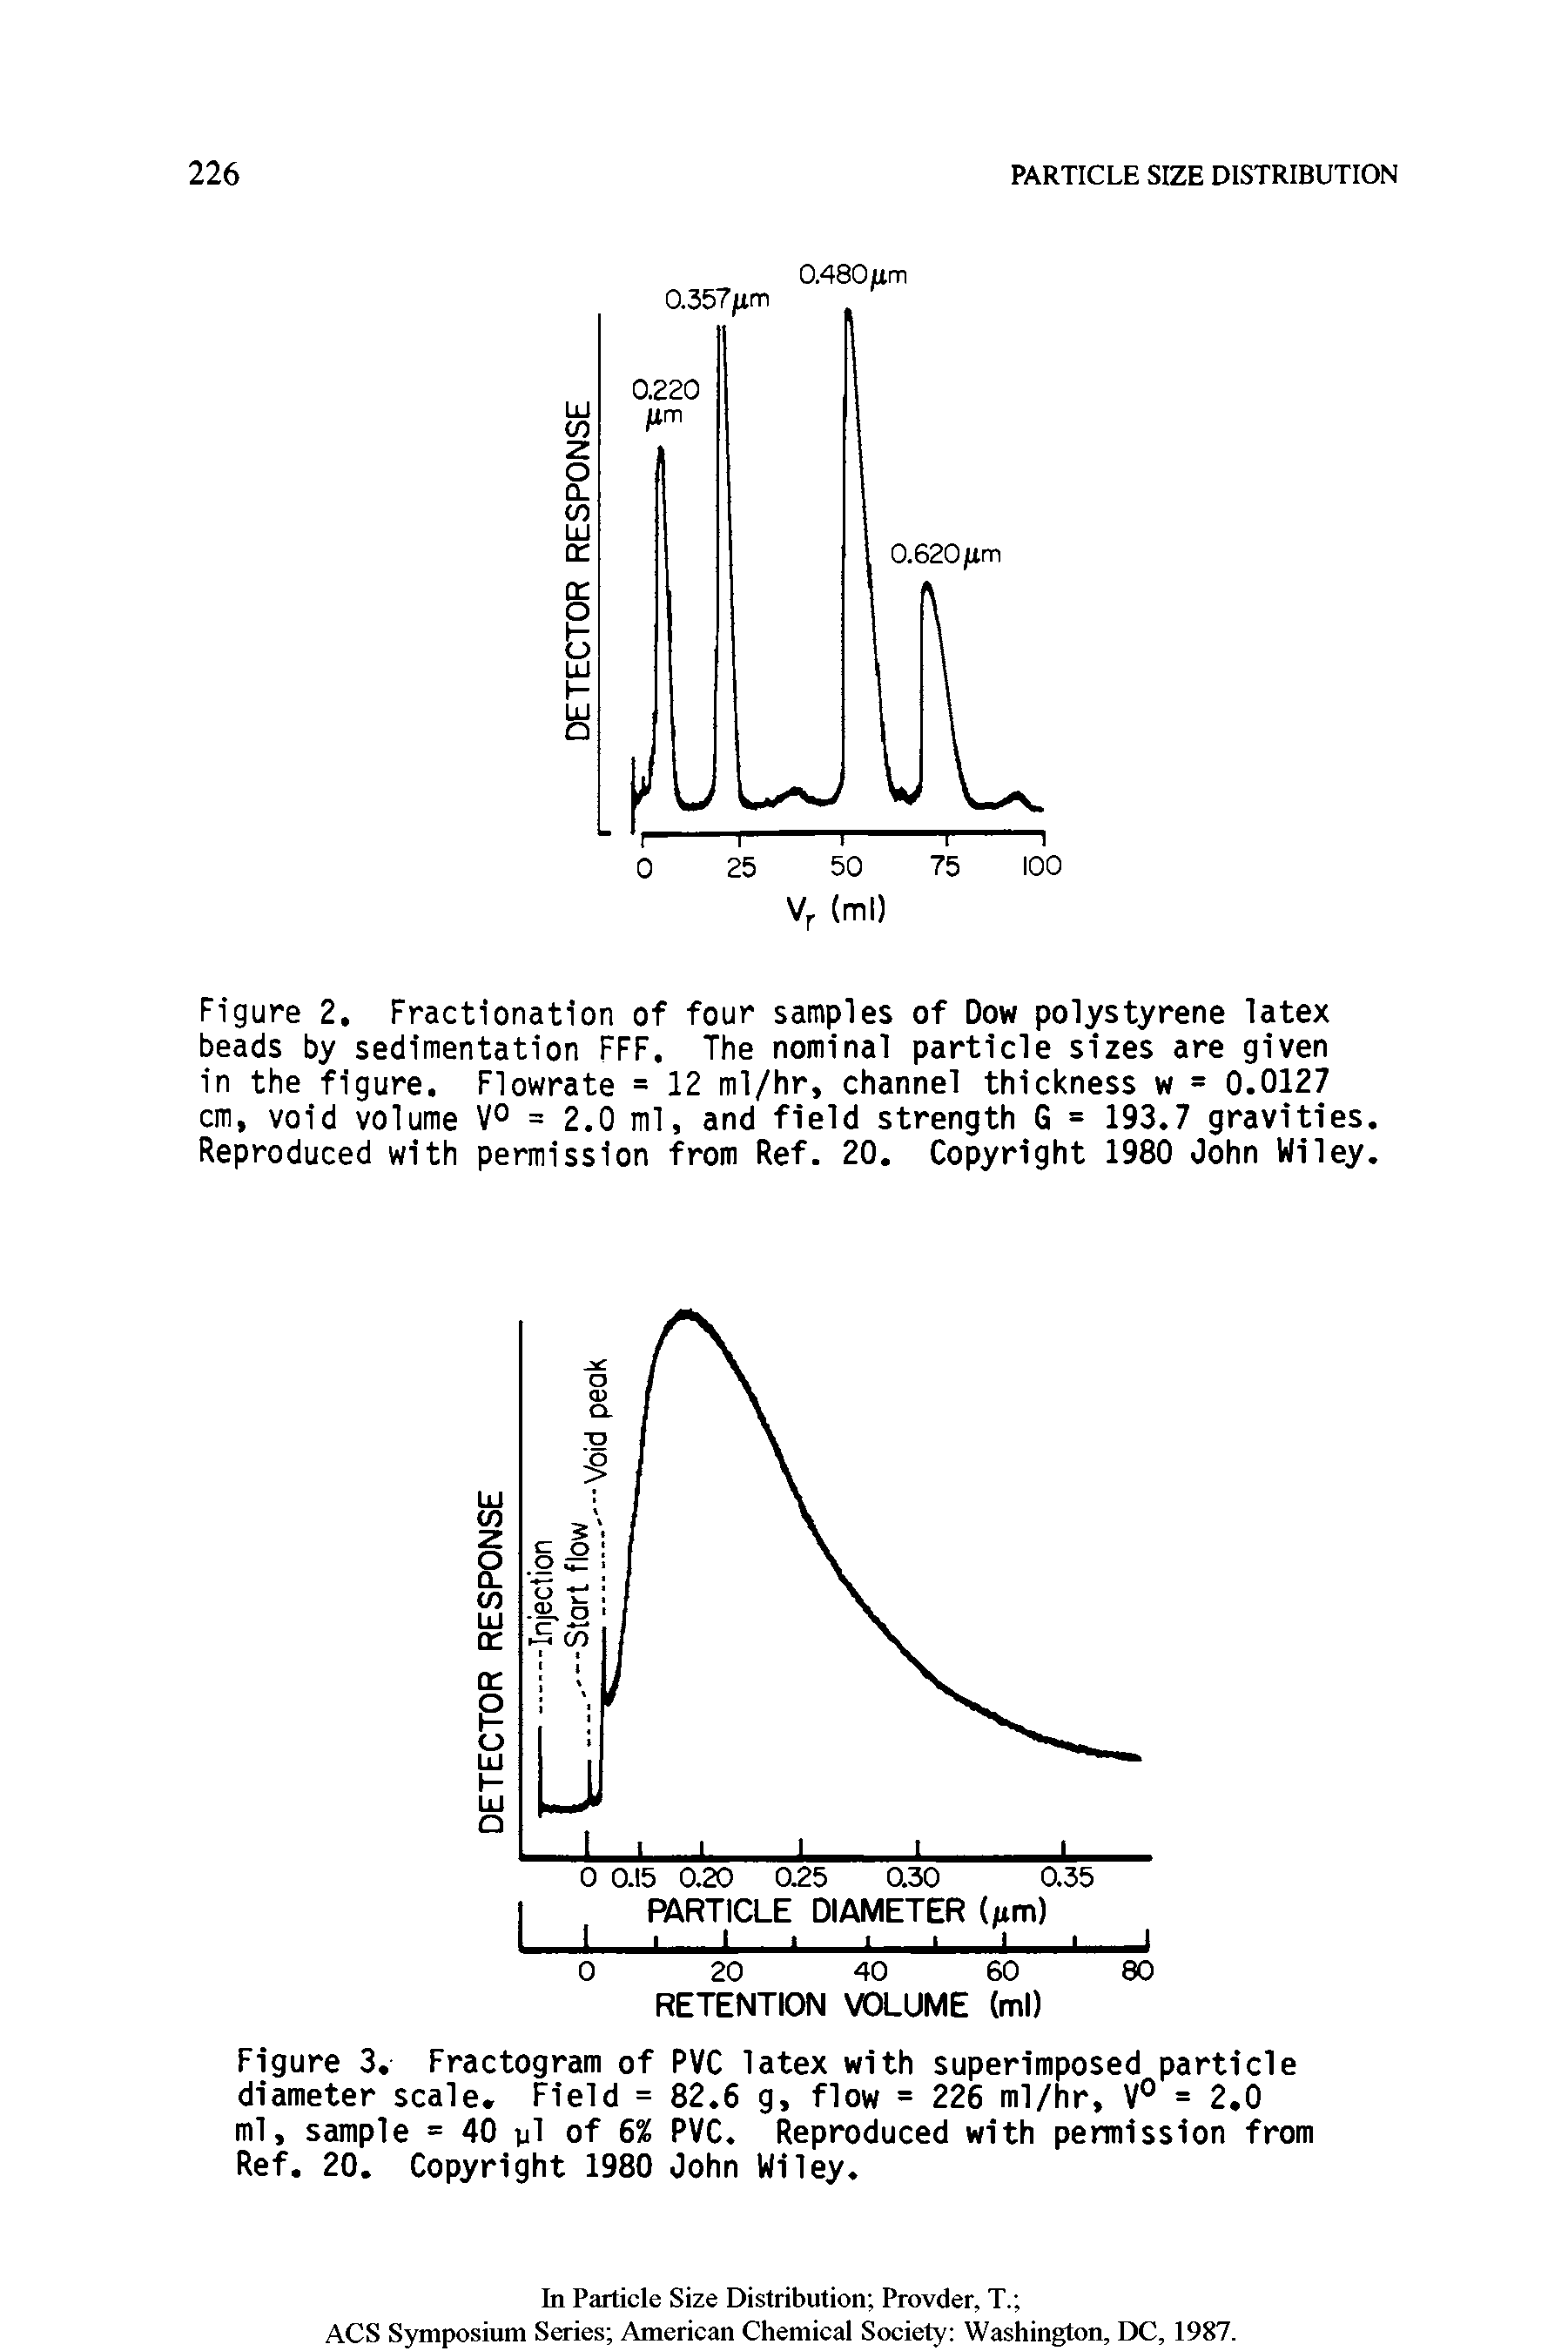 Figure 3. Fractogram of PVC latex with superimposed particle diameter scale. Field = 82.6 g, flow = 226 ml/hr, V° = 2.0 ml, sample = 40 pi of 6% PVC. Reproduced with permission from Ref. 20. Copyright 1980 John Wiley.